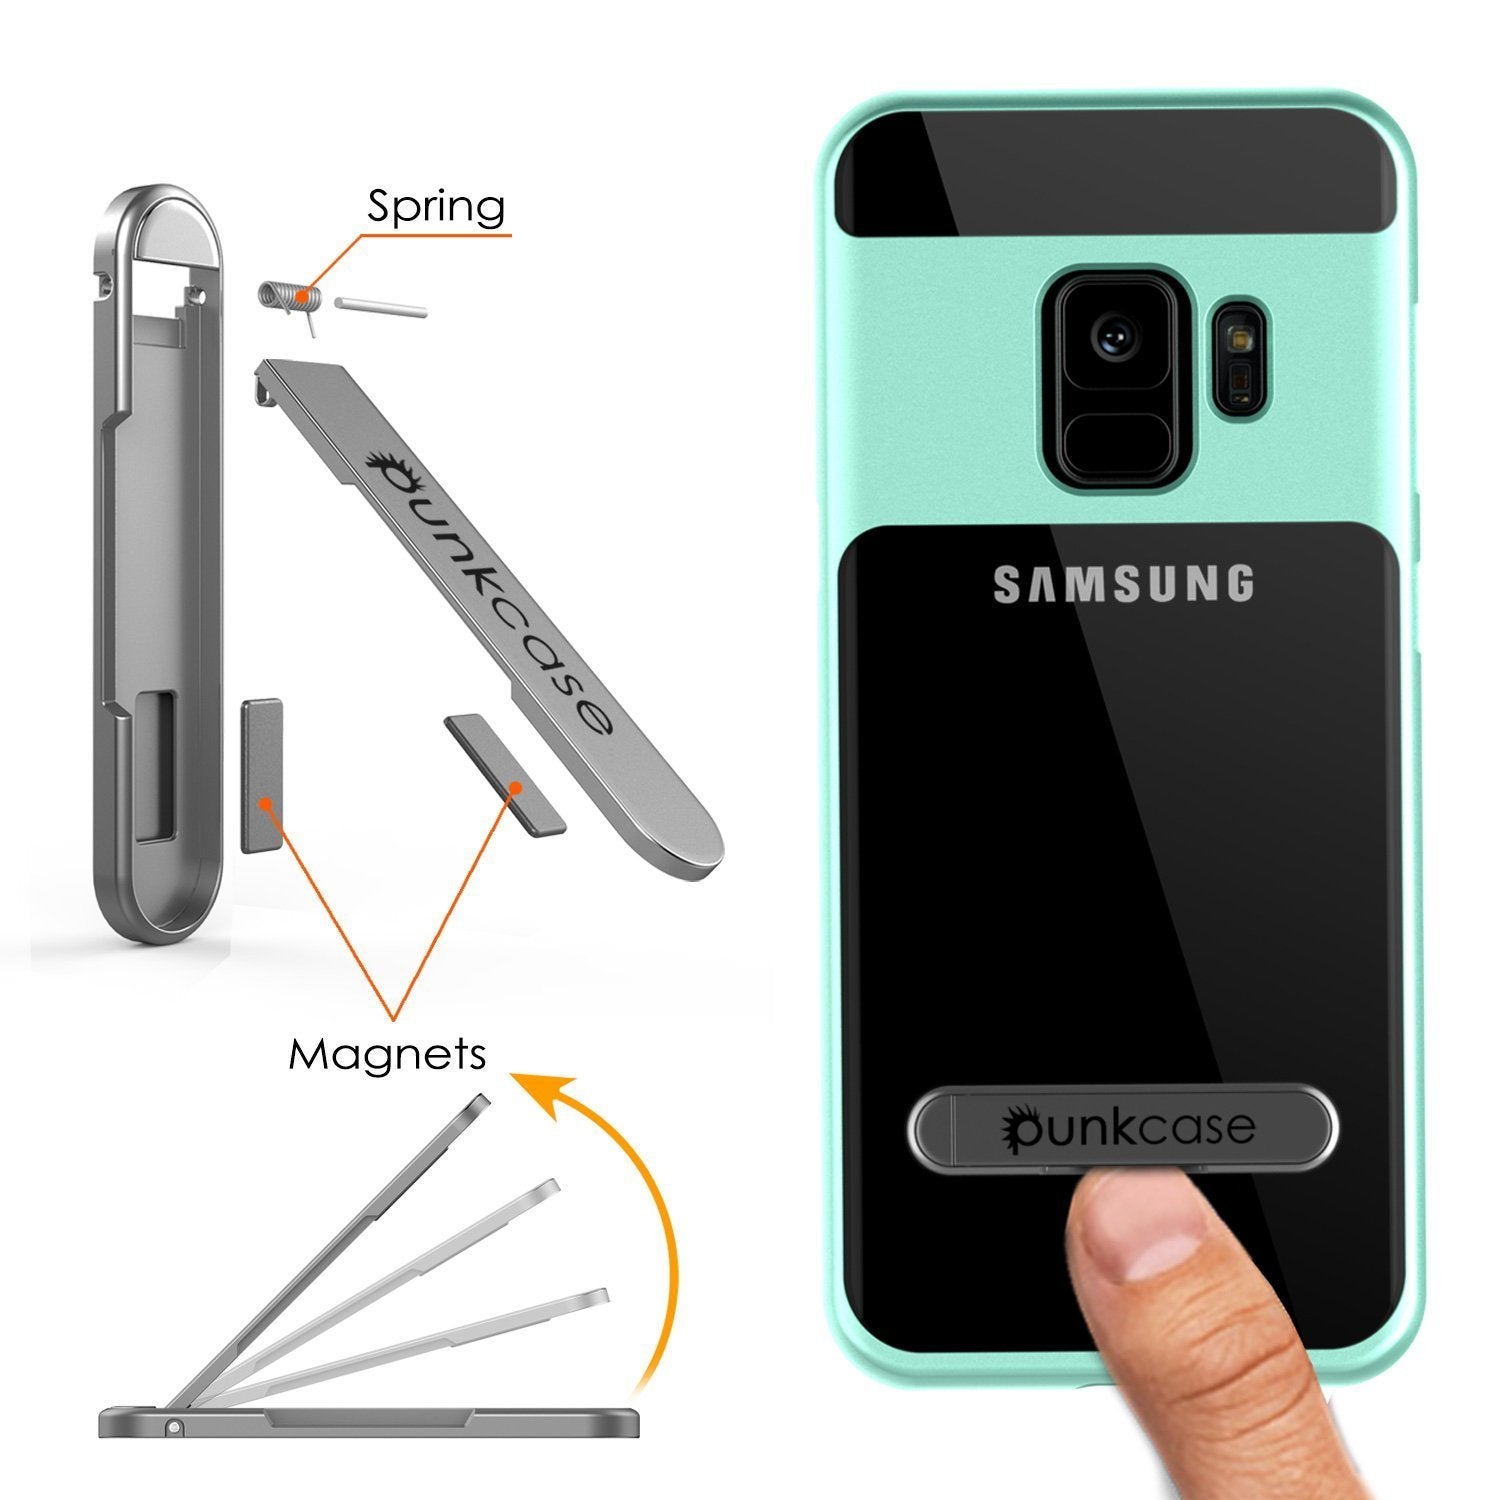 Galaxy S9 Case, PUNKcase [LUCID 3.0 Series] [Slim Fit] [Clear Back] Armor Cover w/ Integrated Kickstand, Anti-Shock System & PUNKSHIELD Screen Protector for Samsung Galaxy S9 [Teal]